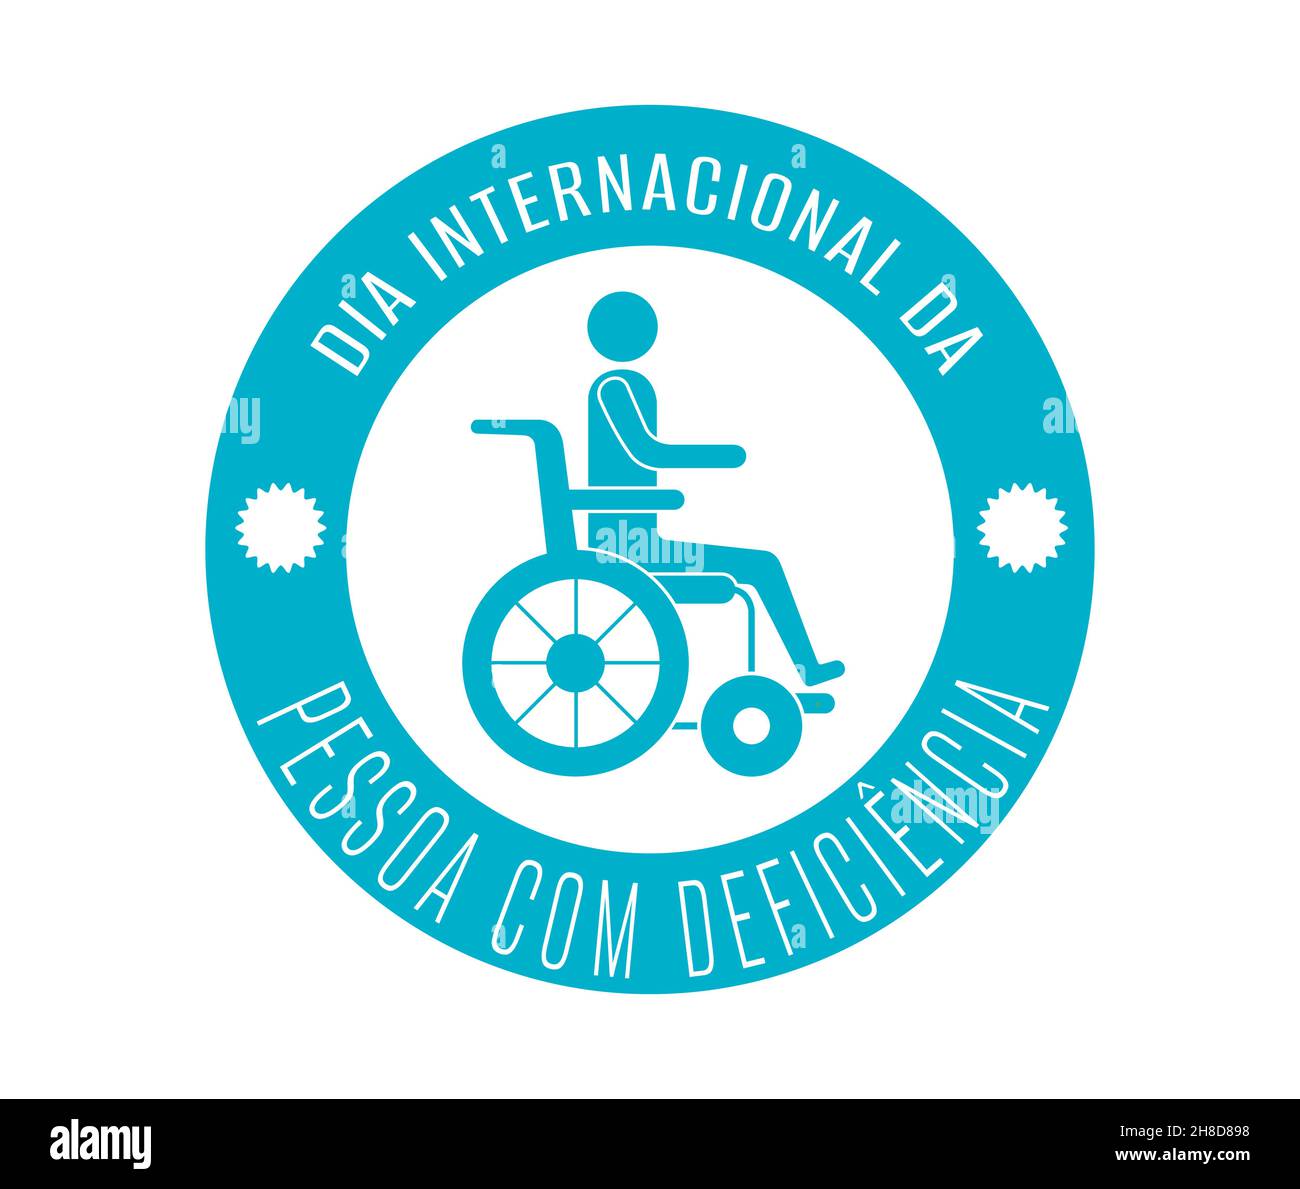 World disability day sticker Portuguese language. International Day of Persons with Disabilities Portuguese. Disabled, handicapped, defective, malform Stock Vector